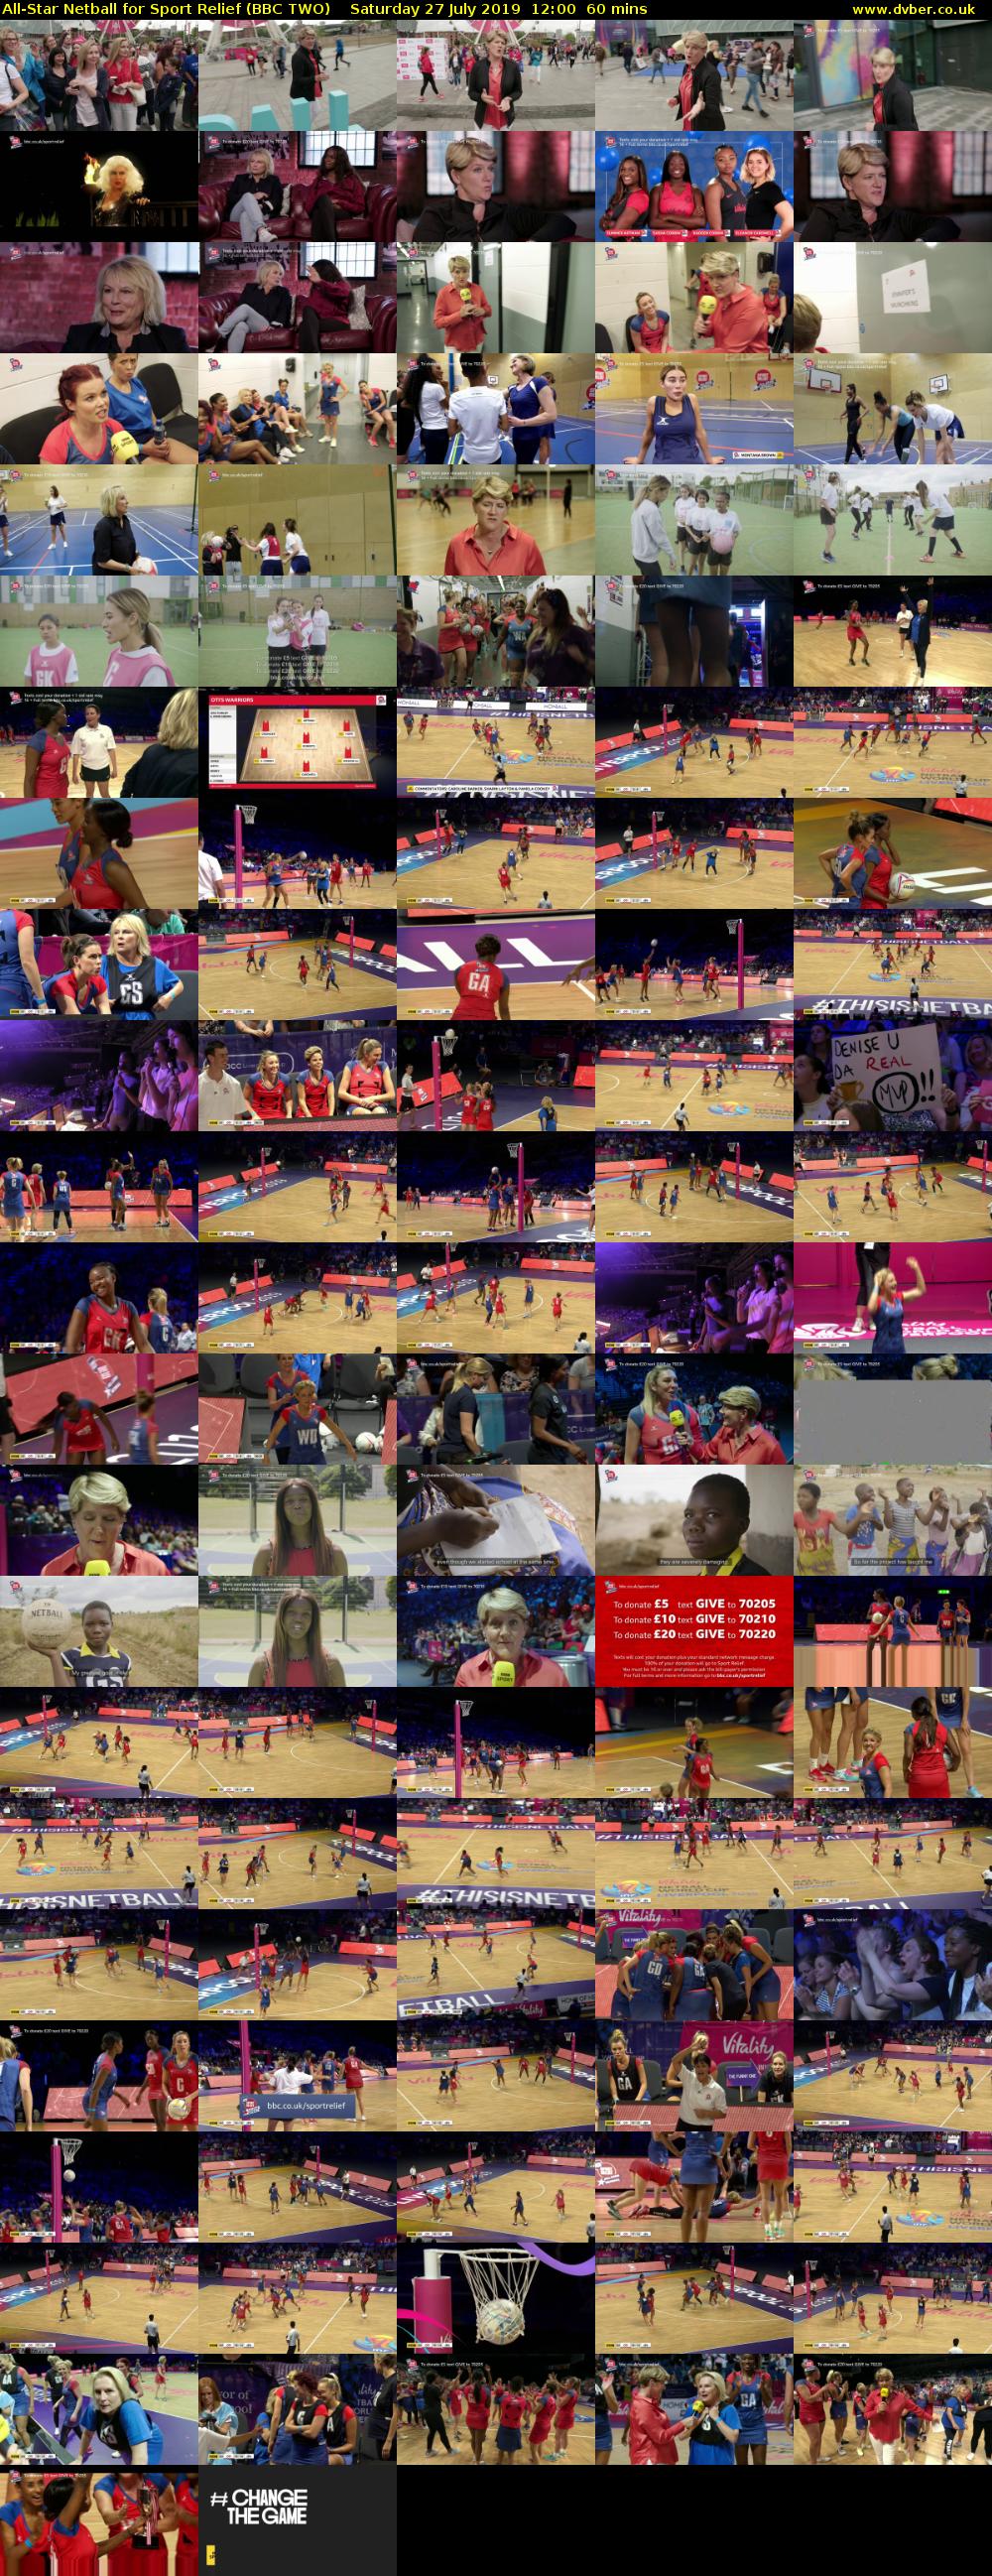 All-Star Netball for Sport Relief (BBC TWO) Saturday 27 July 2019 12:00 - 13:00